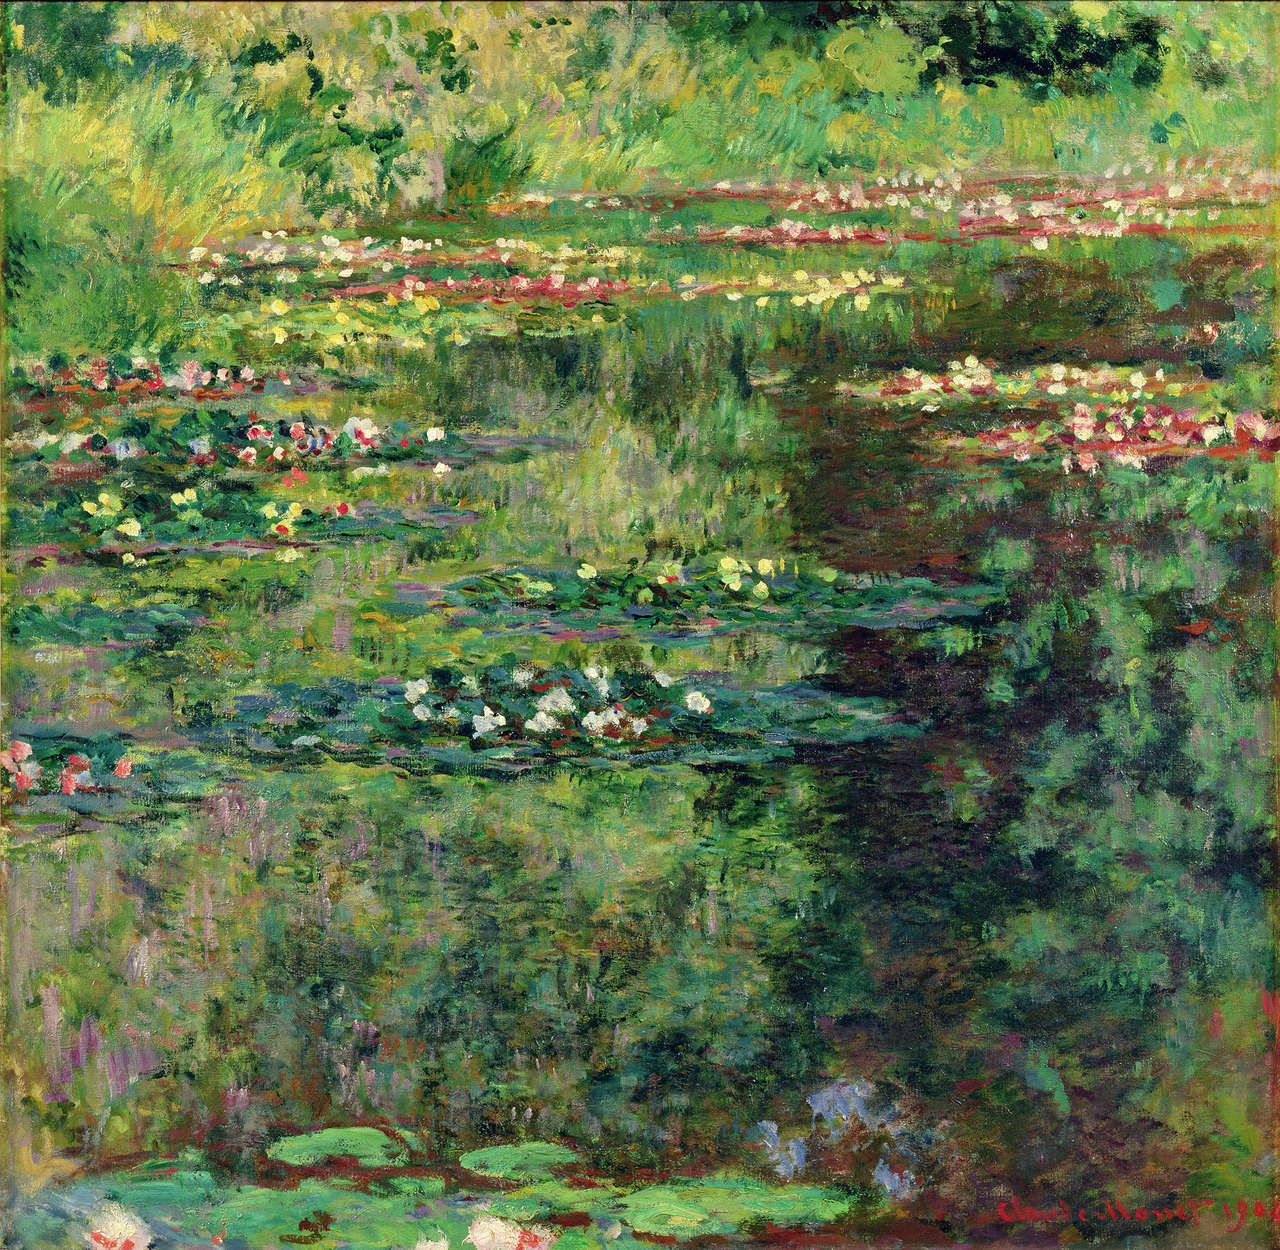             Photo wallpaper "The water lily pond" by Claude Monet
        